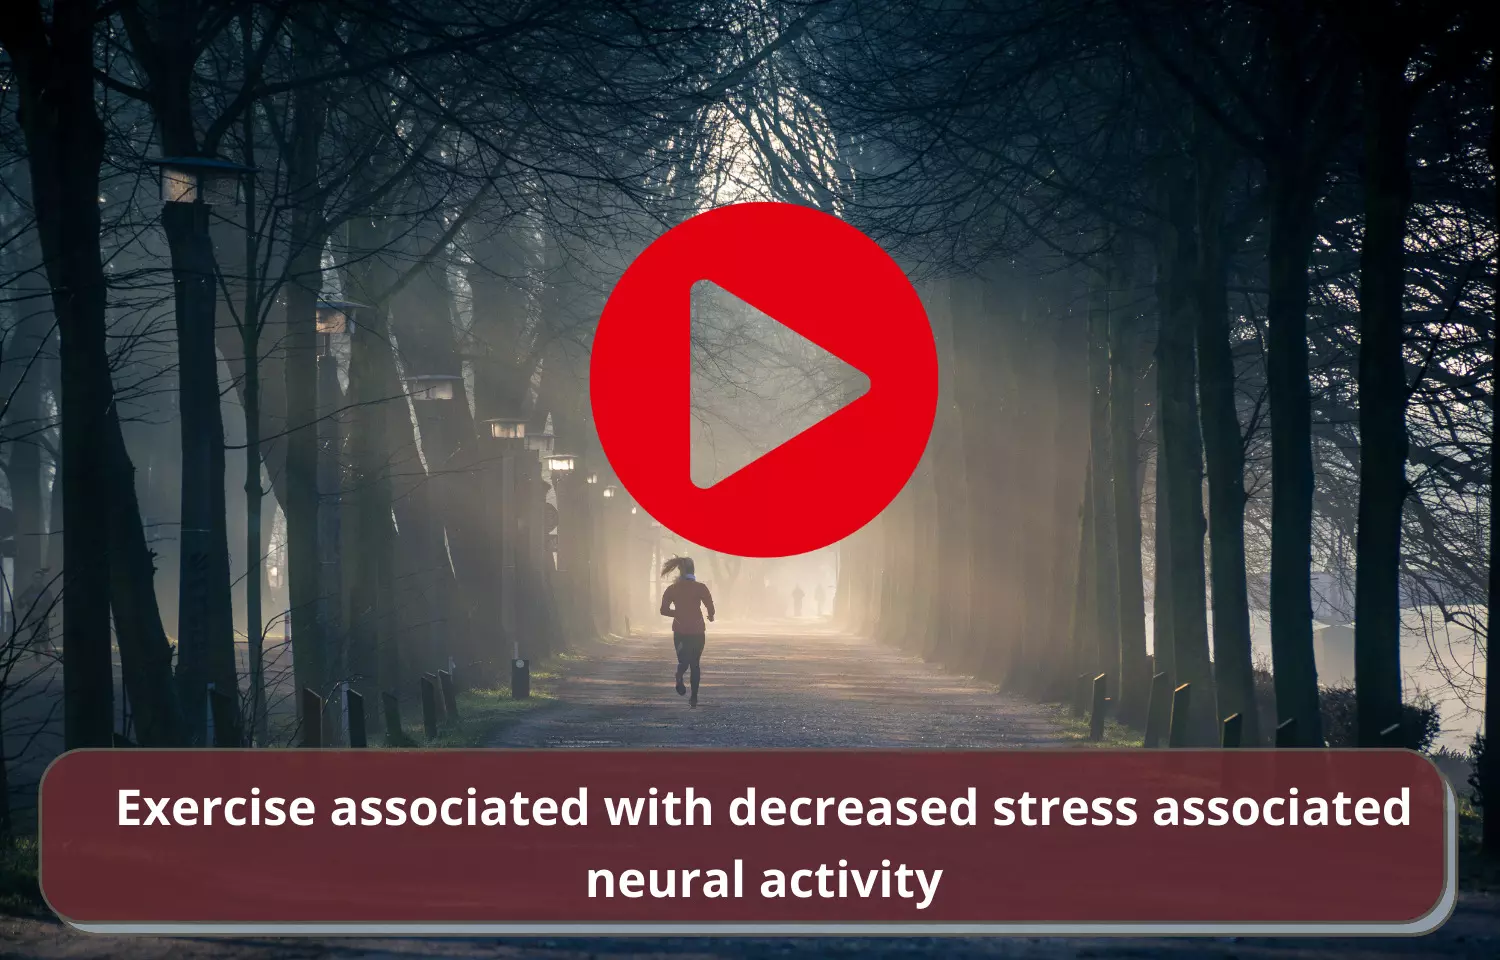 Exercise associated with decreased stress associated neural activity